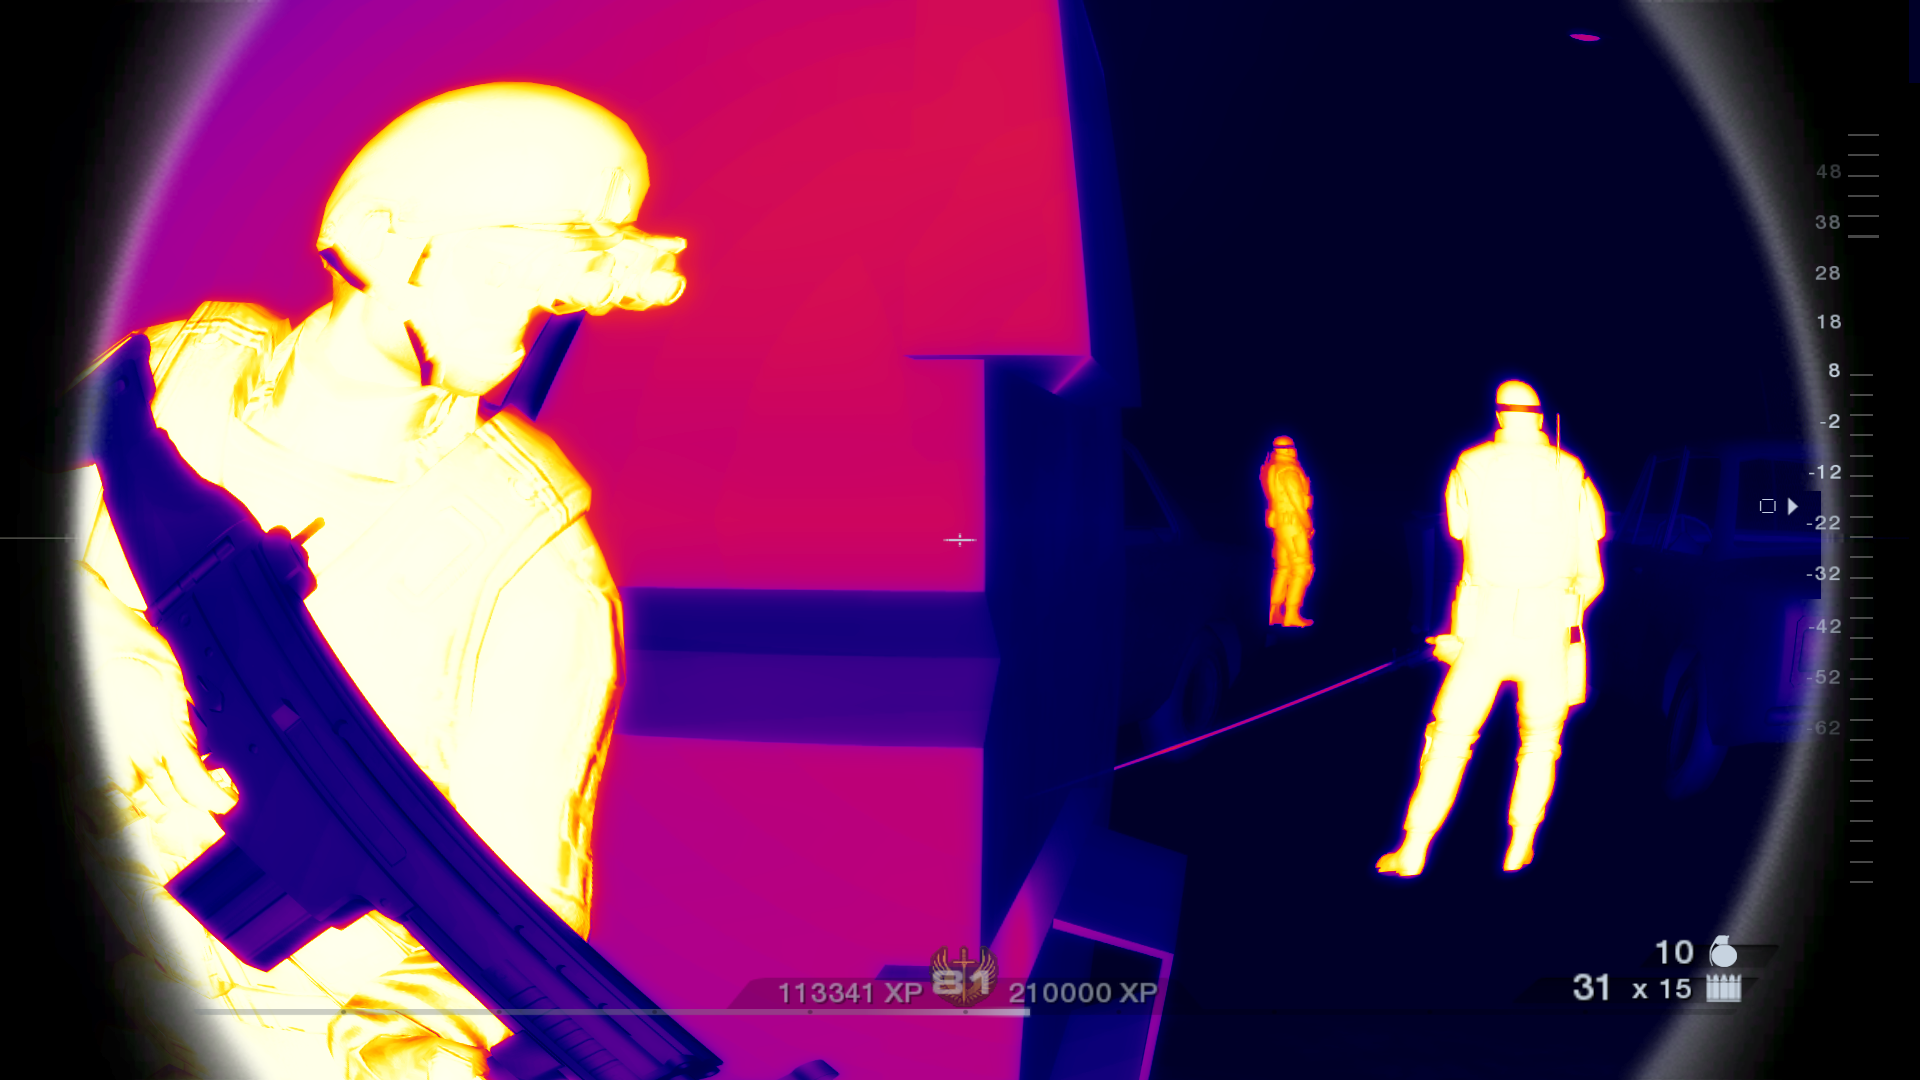 thermal vision of soldiers exemplifying metabolic rate for metabolic advantage article